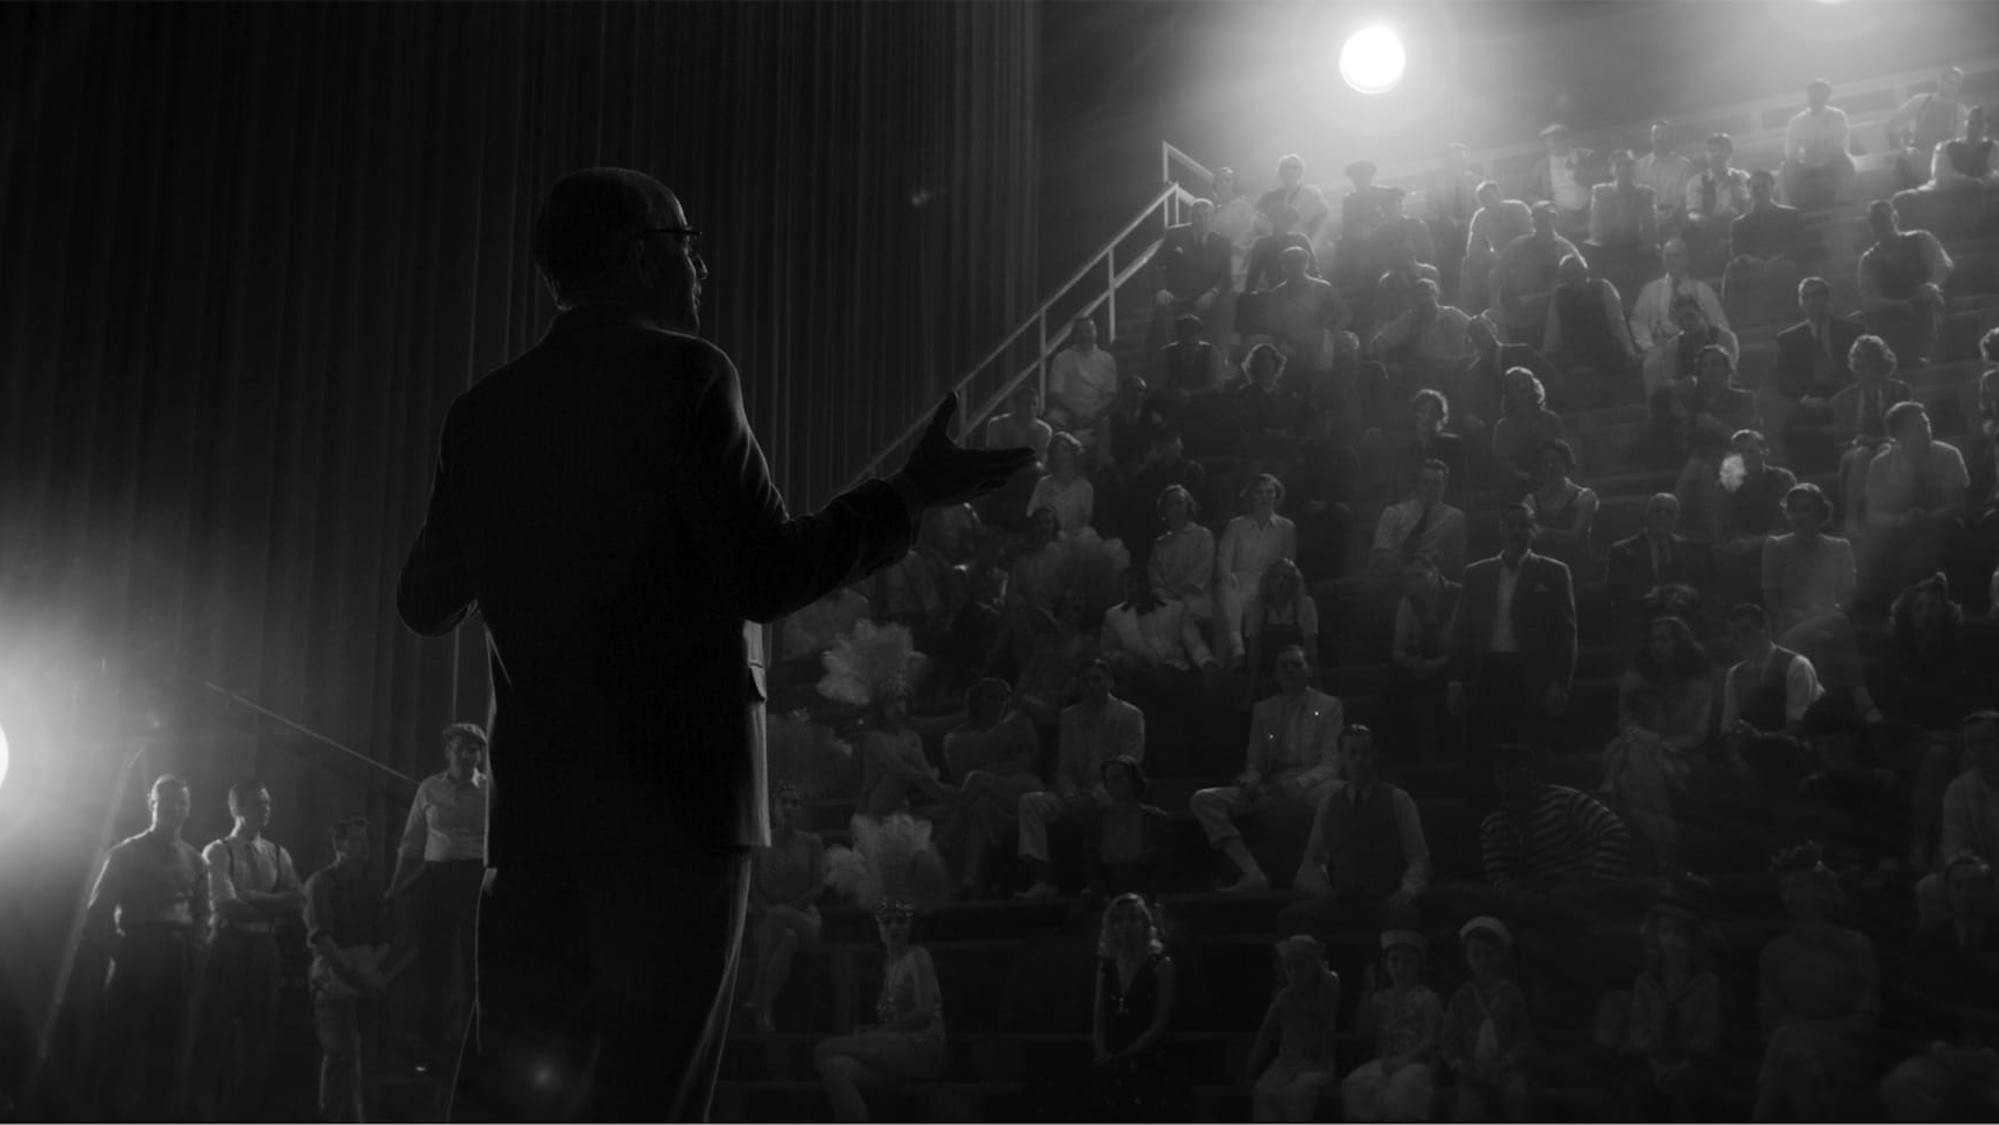 In a shot from the film, we see how the scene above translates to a black-and-white experience. The spotlights around the theater are like small suns.